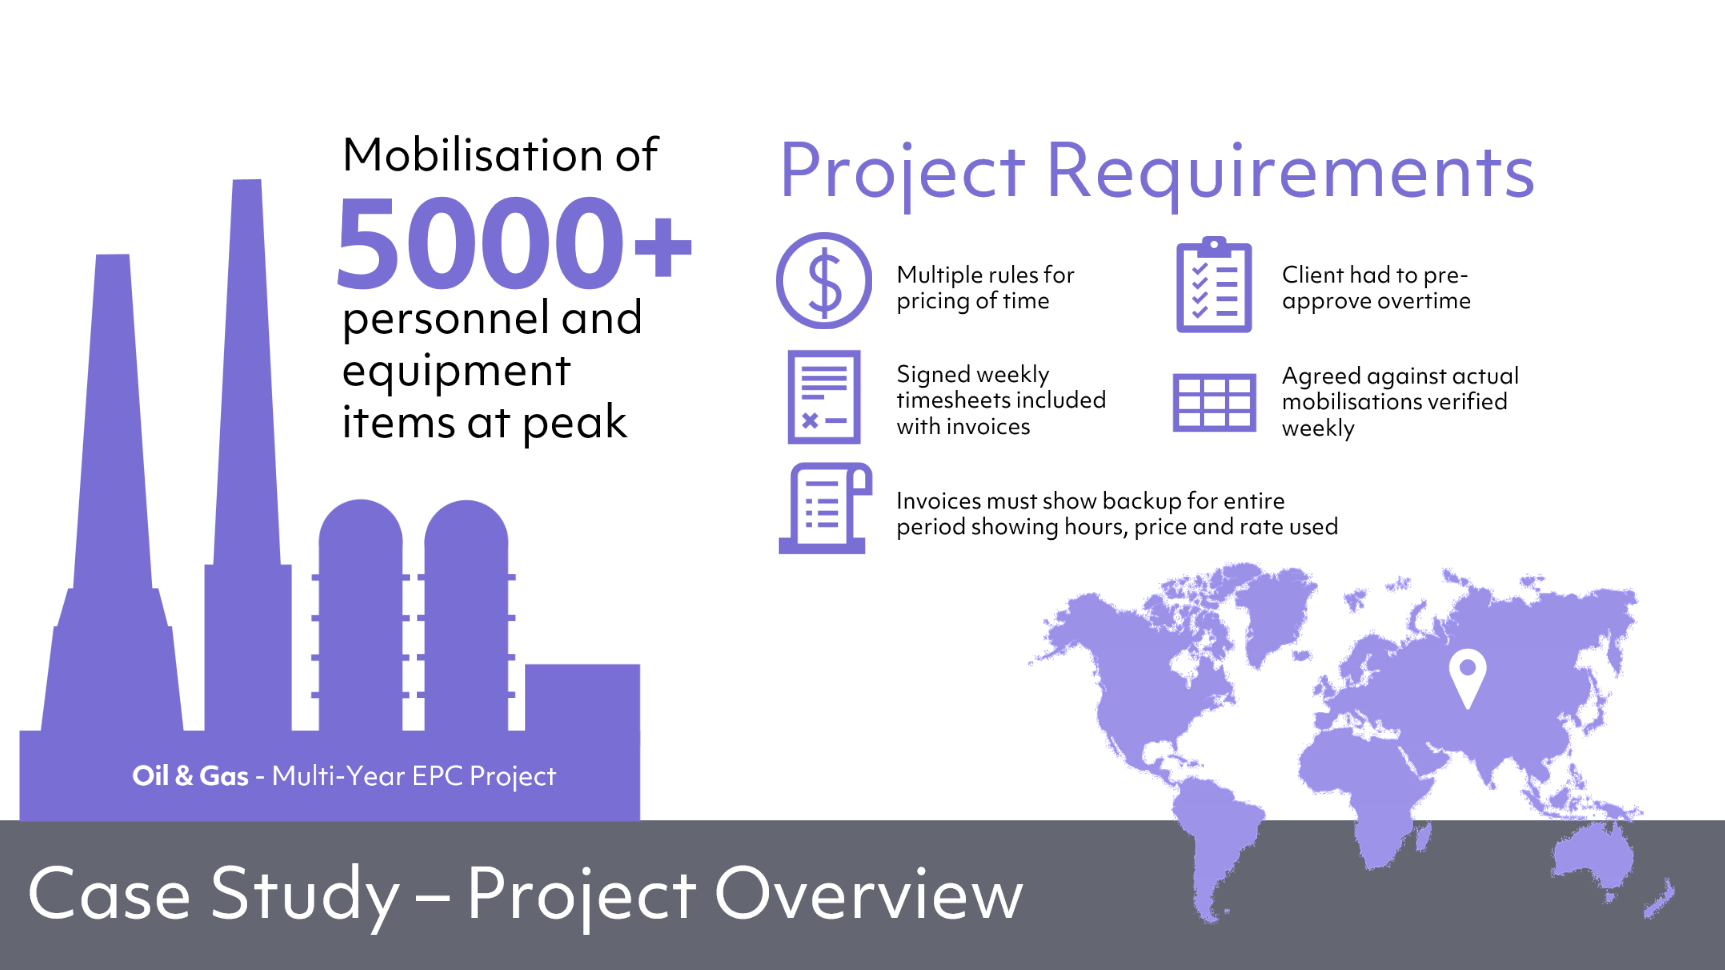 An Overview of the Project's Time Tracking Requirements